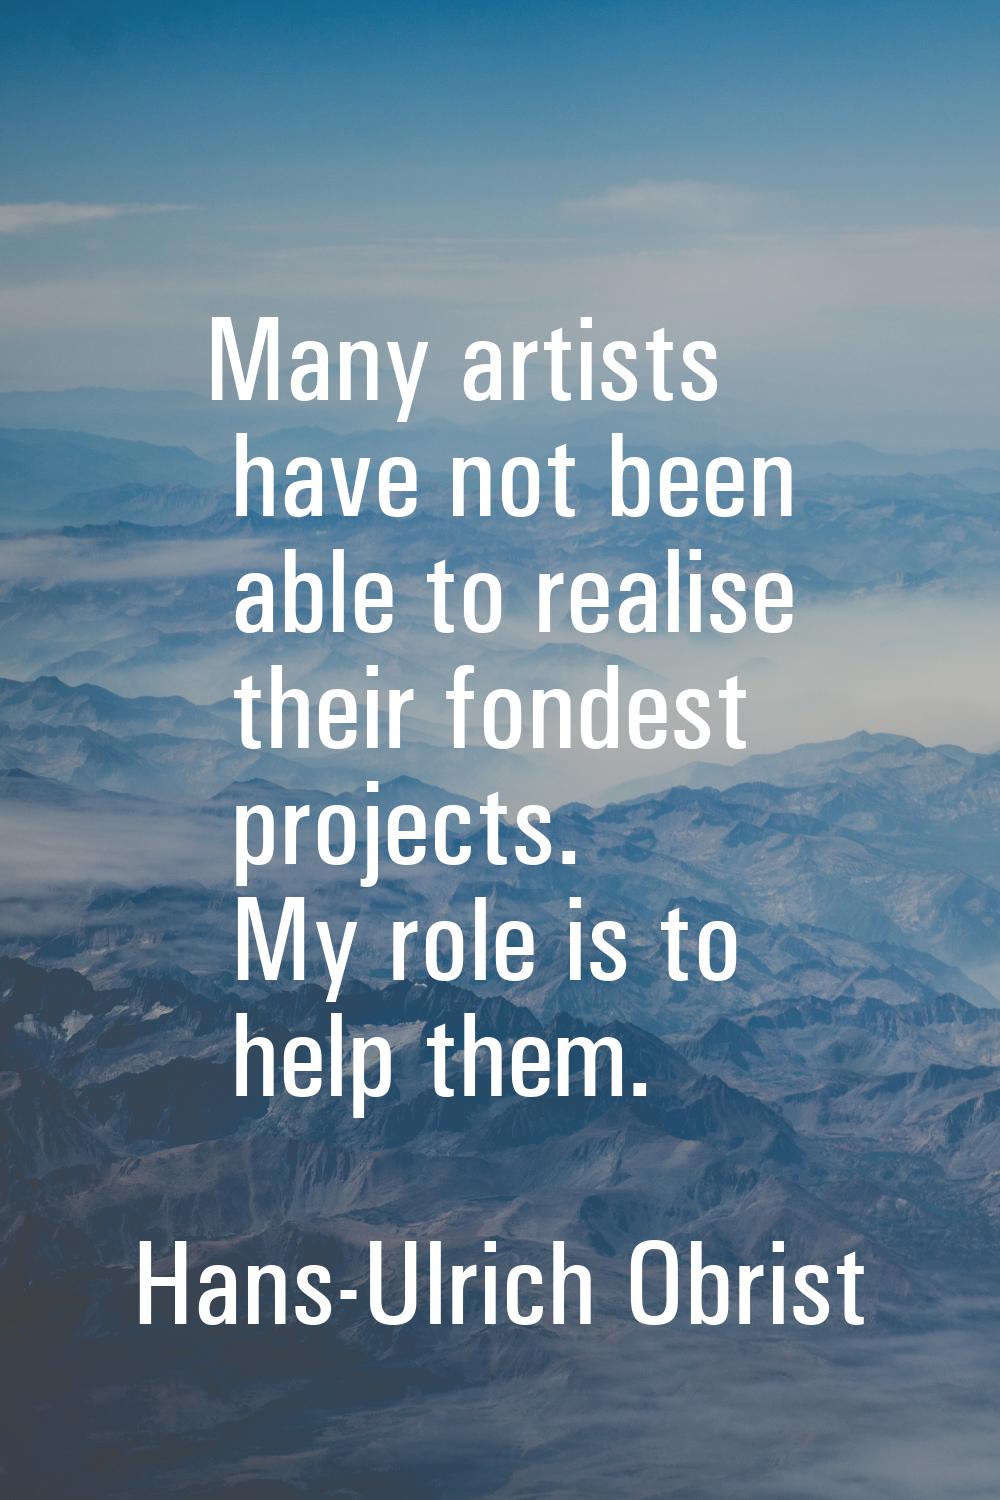 Many artists have not been able to realise their fondest projects. My role is to help them.